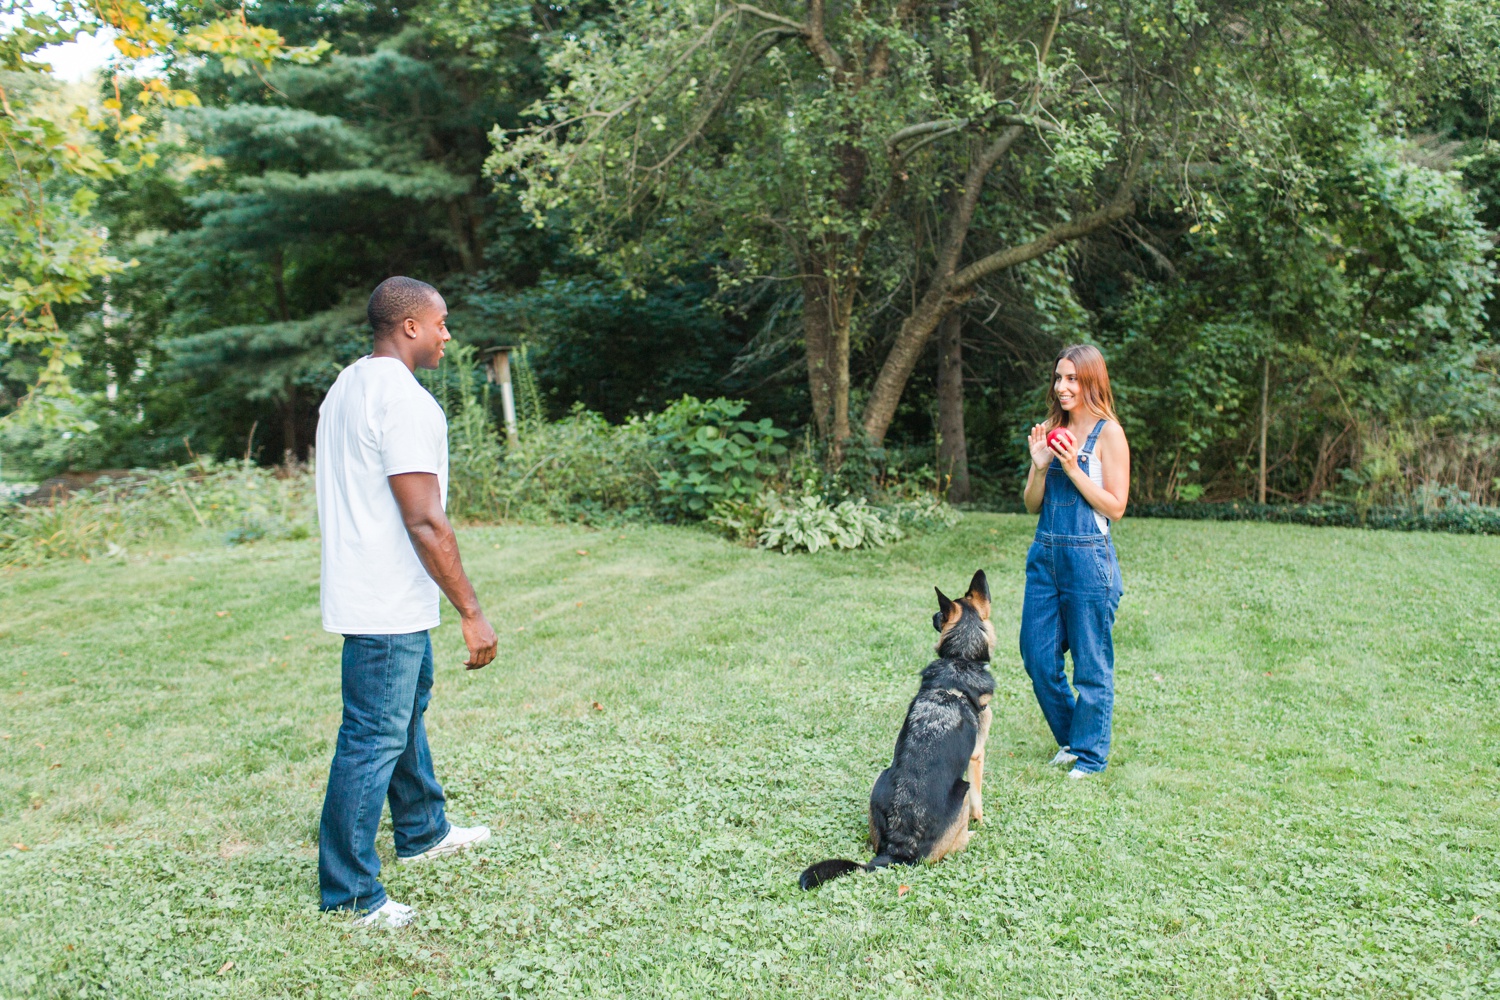 fishkill-hudson-valley-ny-home-engagement-session-top-ct-nyc-destination-wedding-photographer-shaina-lee-photography-photo